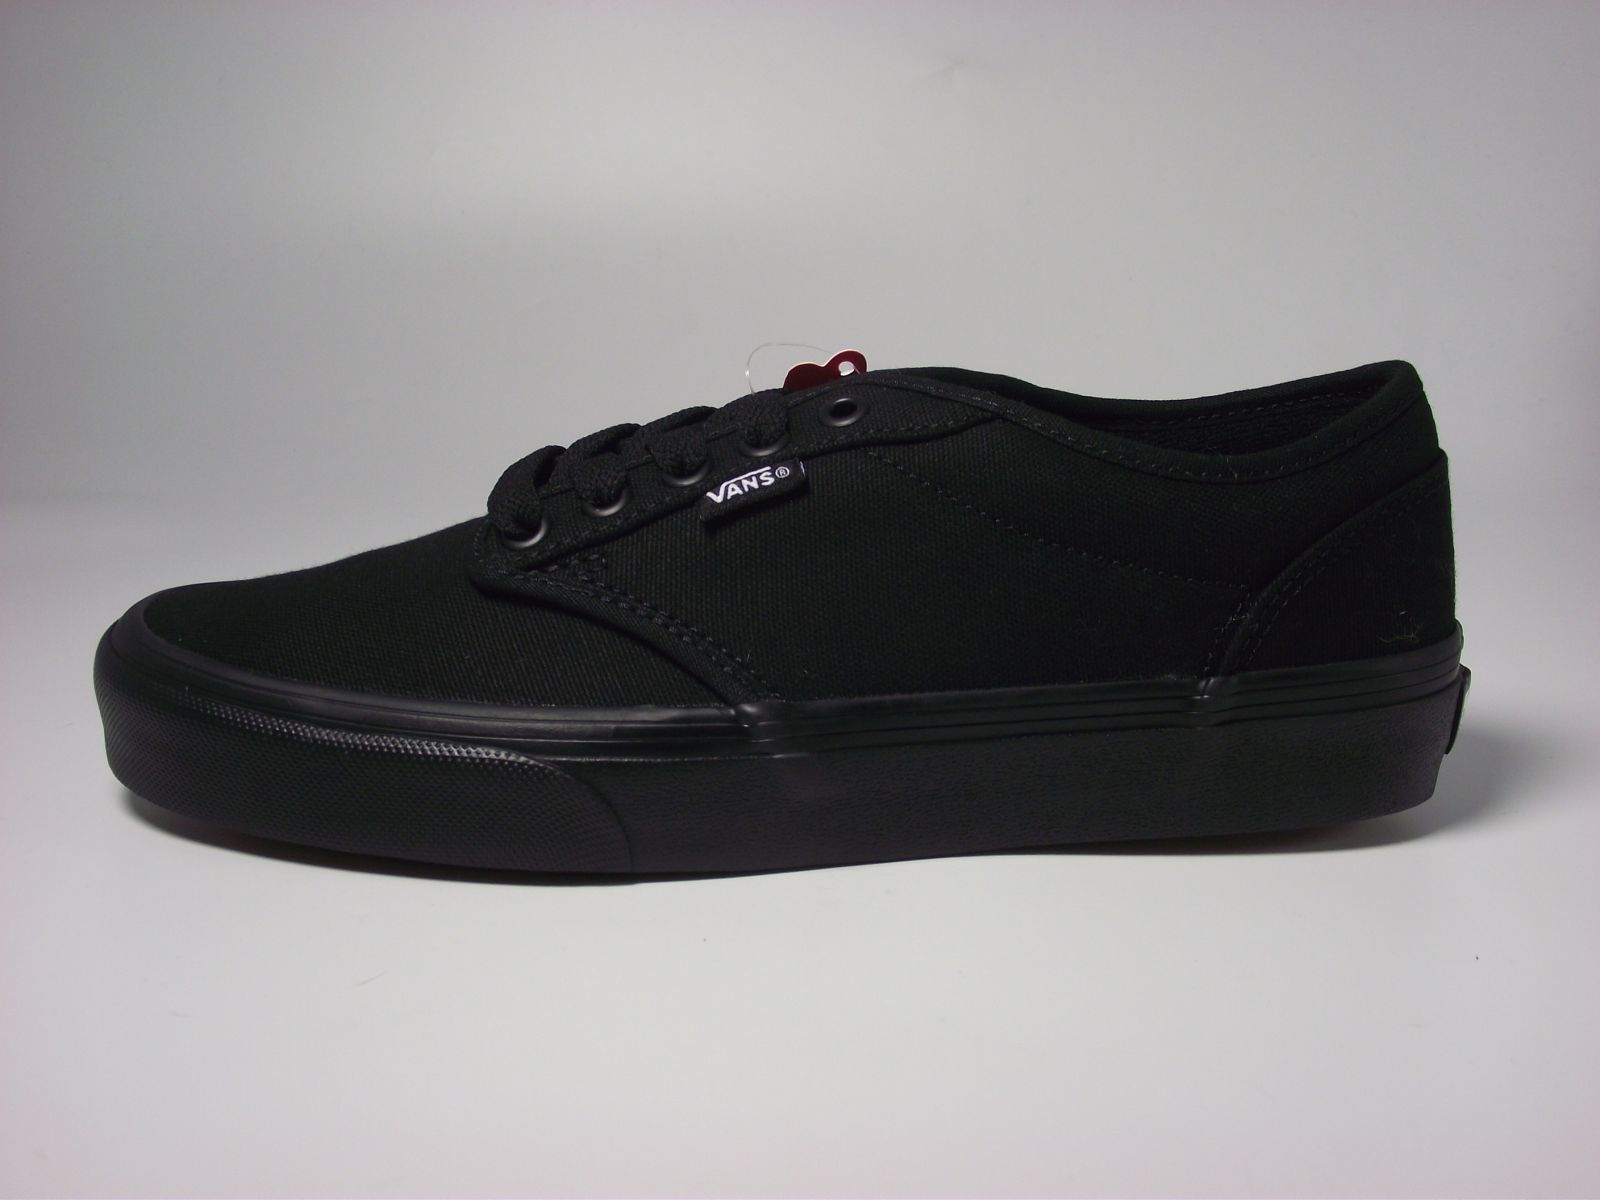 Vans Sneackers Noir hommes (MN Atwood - VN000TUY1861) - Marques à Suivre